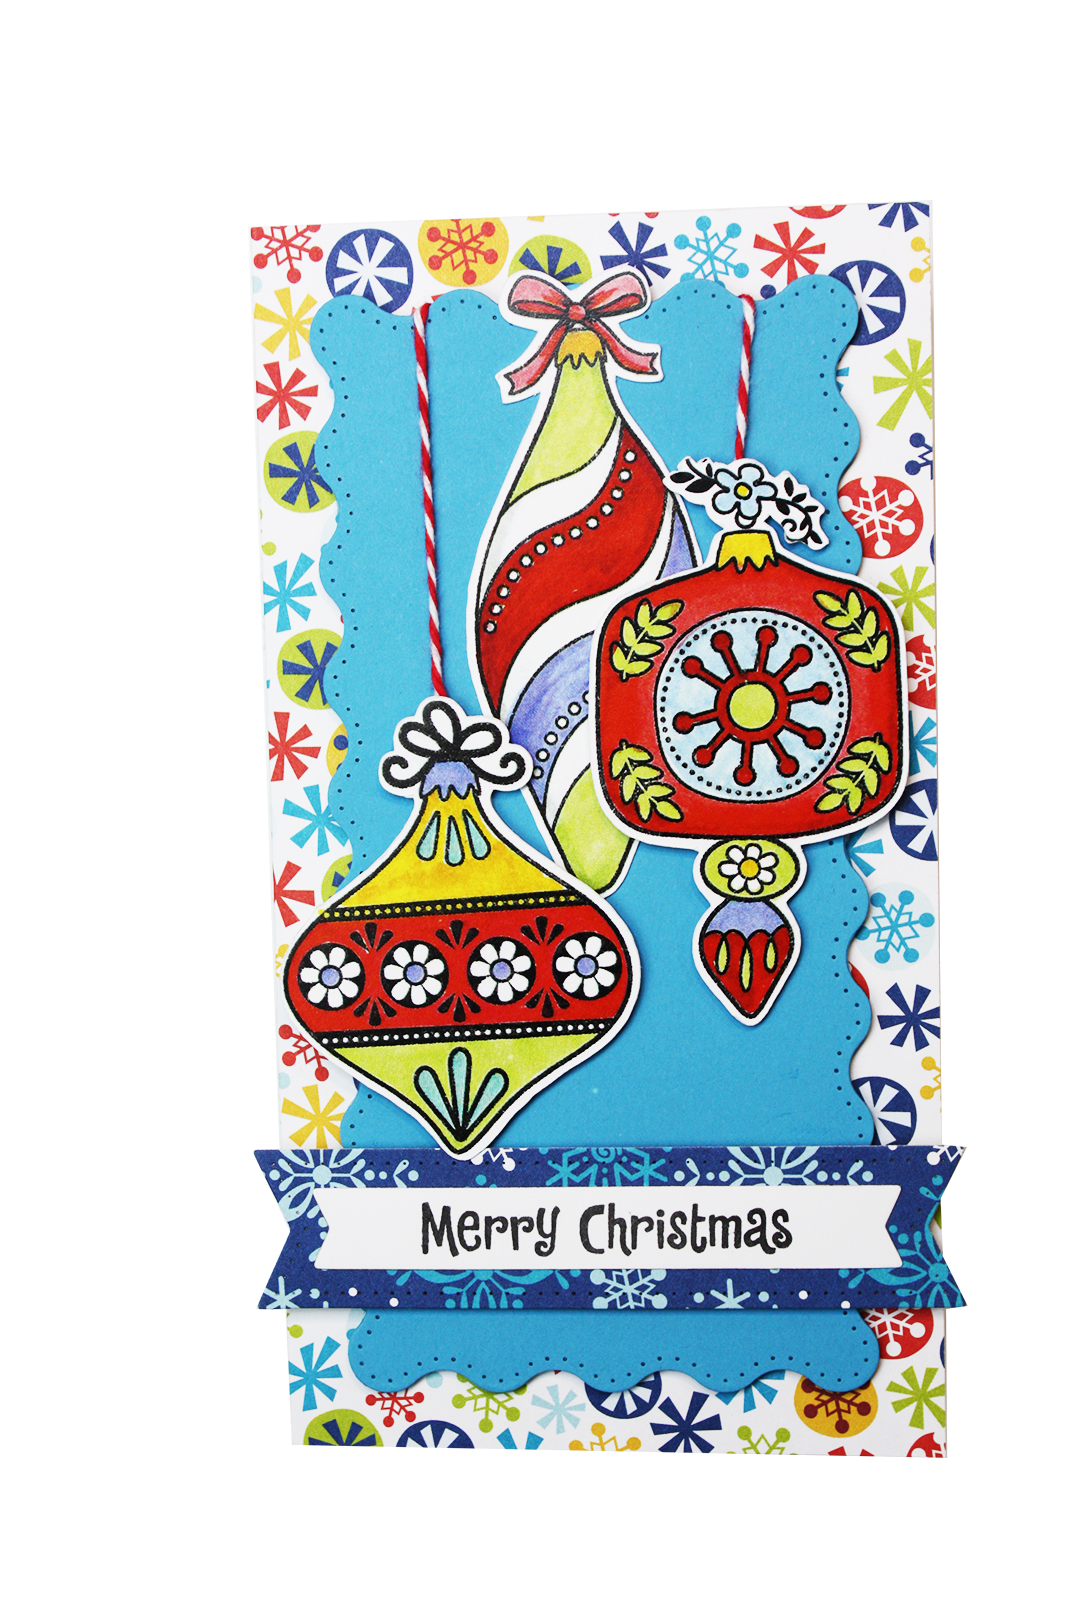 Handmade card using the stamp set and die cut, "Deck the Halls" from Dare 2B Artzy. Three fun ornaments with the sentiment, "Merry Christmas".